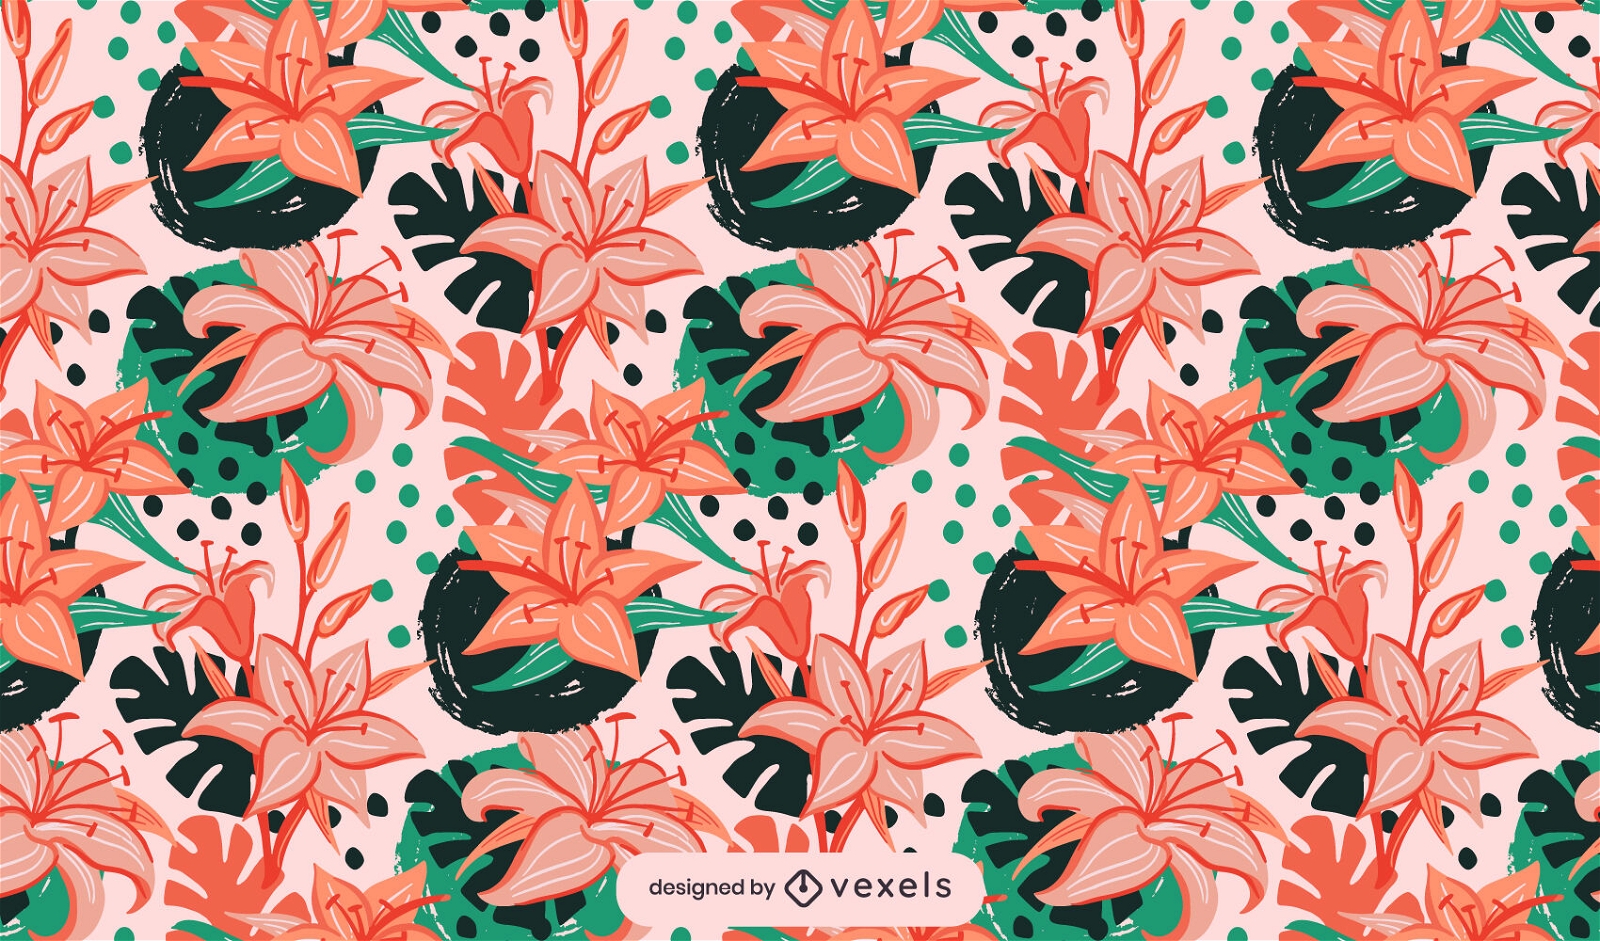 Lily flowers and leaves pattern design